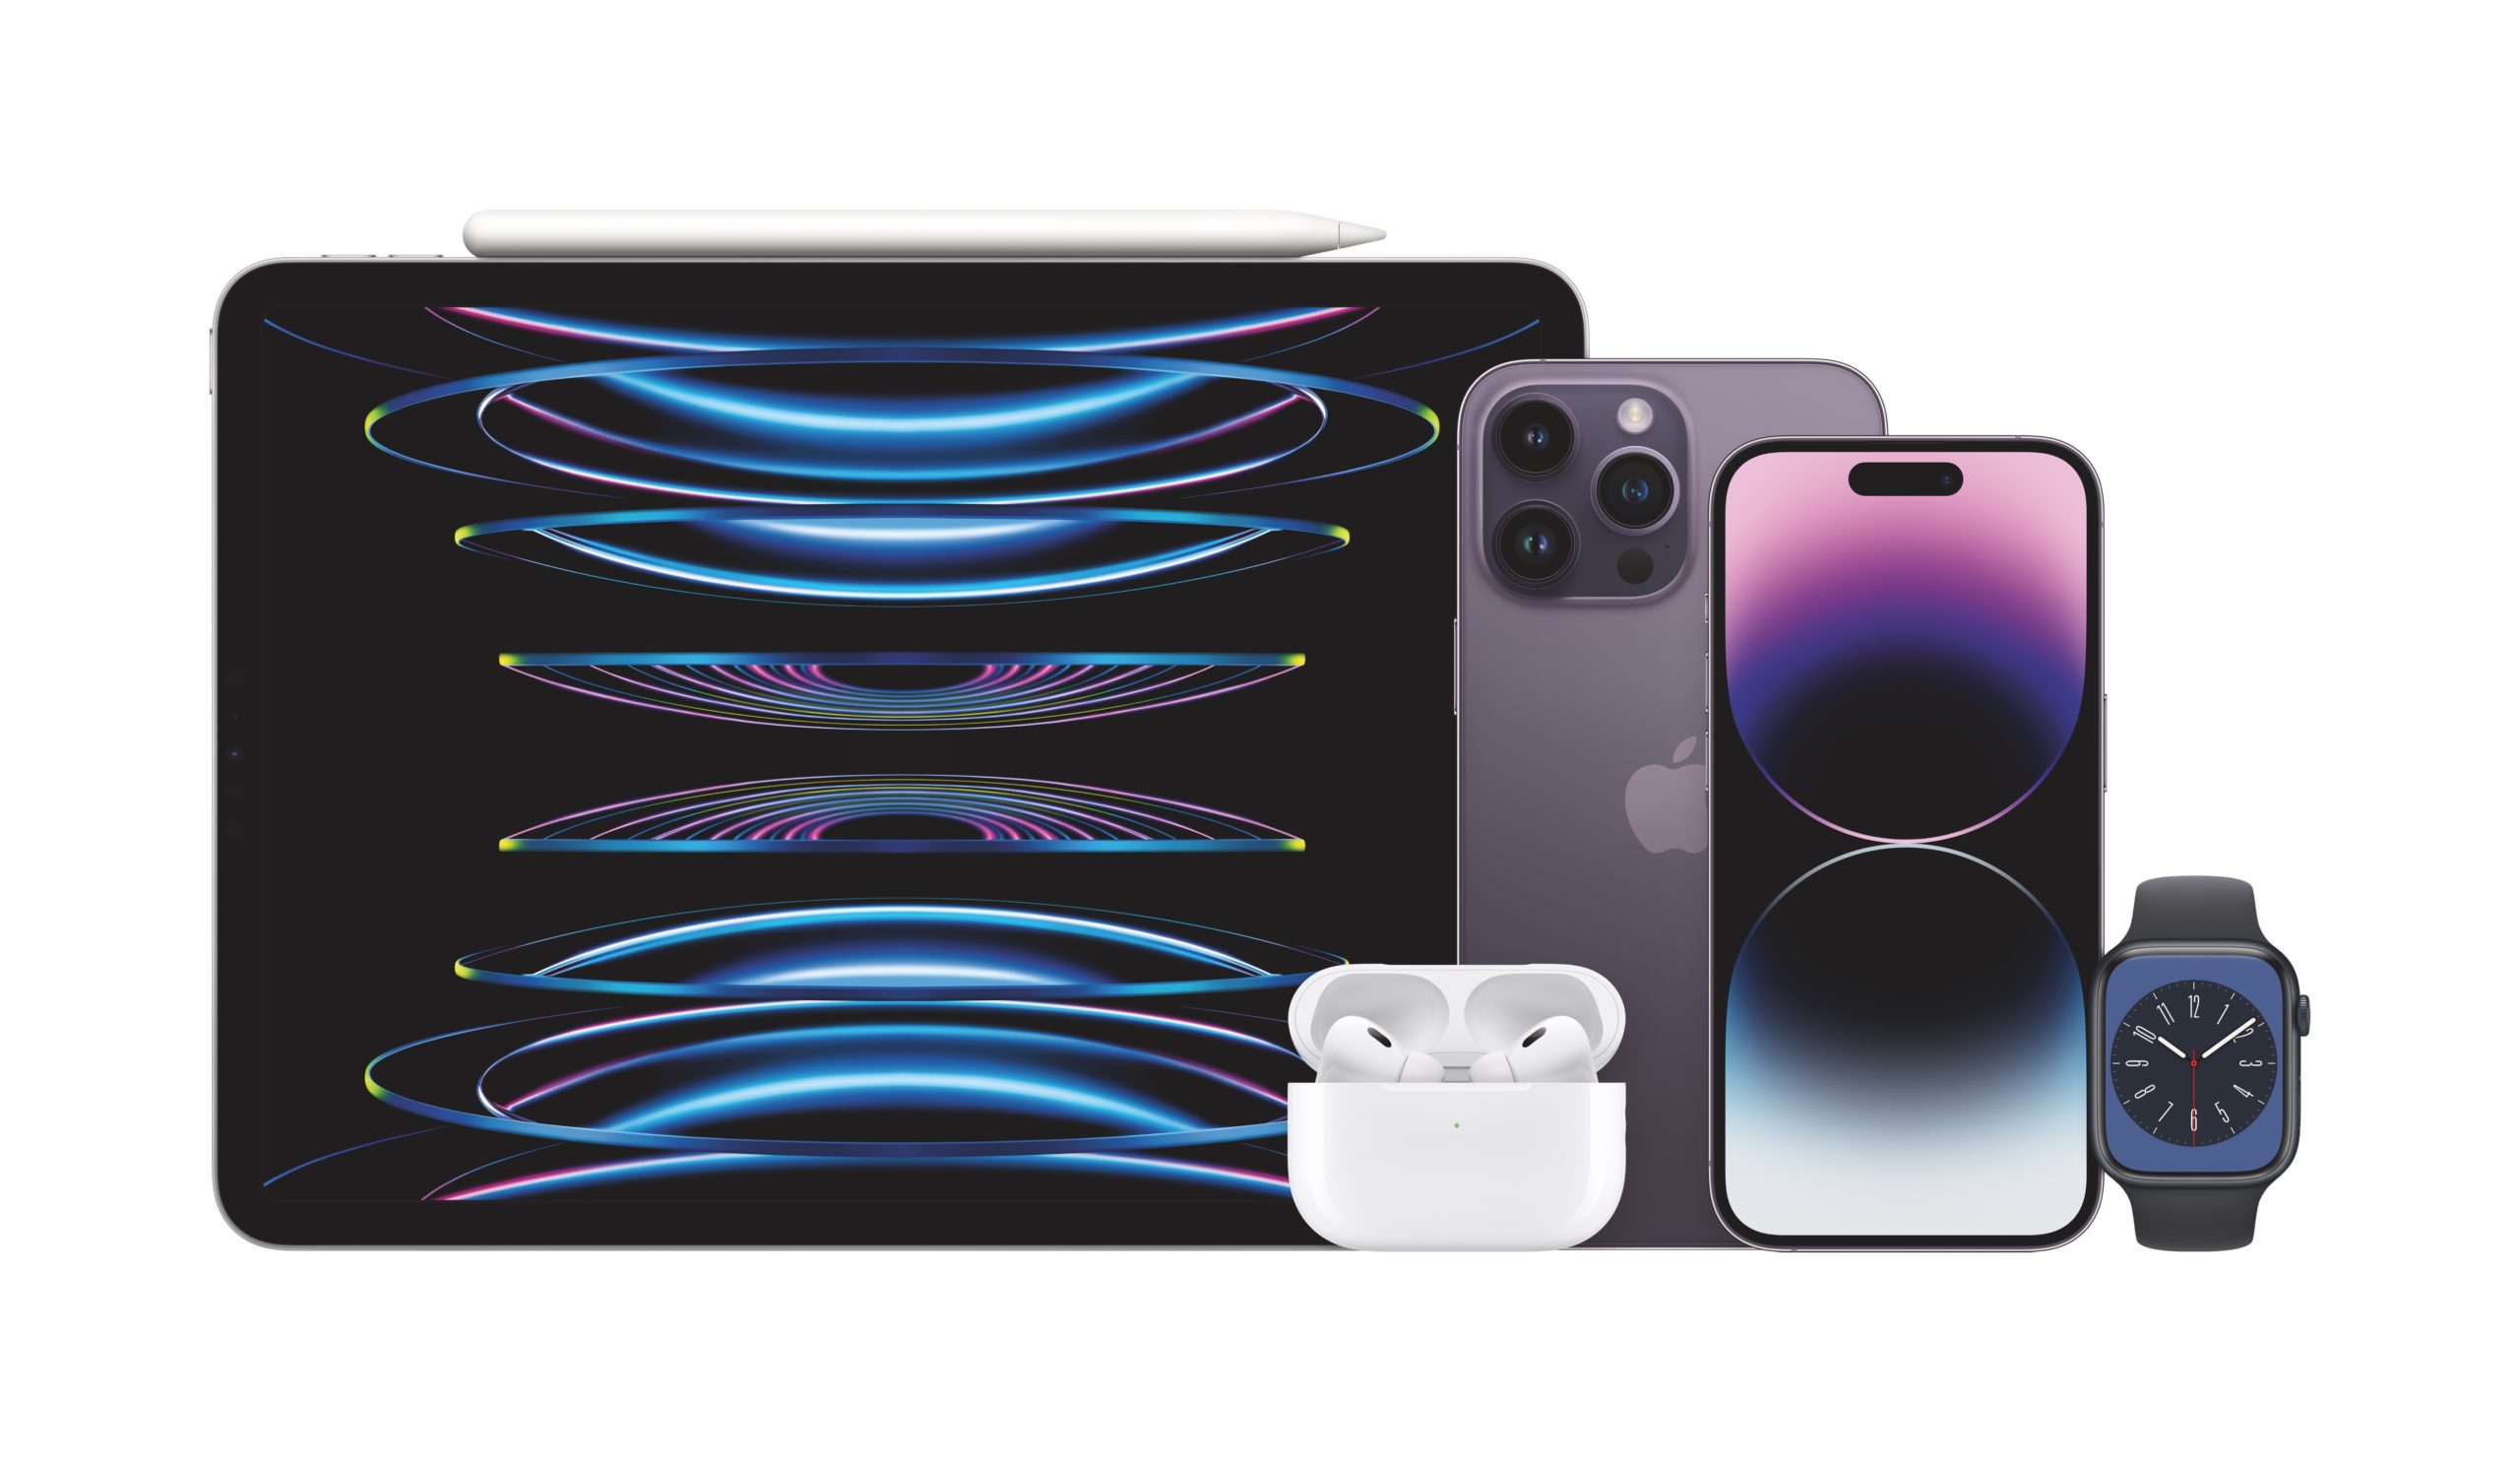 Multi-Product_iPad_Pro_11-in_Apple_Pencil_2nd-gen_AirPods_Pro_2nd-Gen_iPhone_14_Pro_Max_iPhone_14_Pro_Apple_Watch_Series_8_Print__USEN-1-scaled